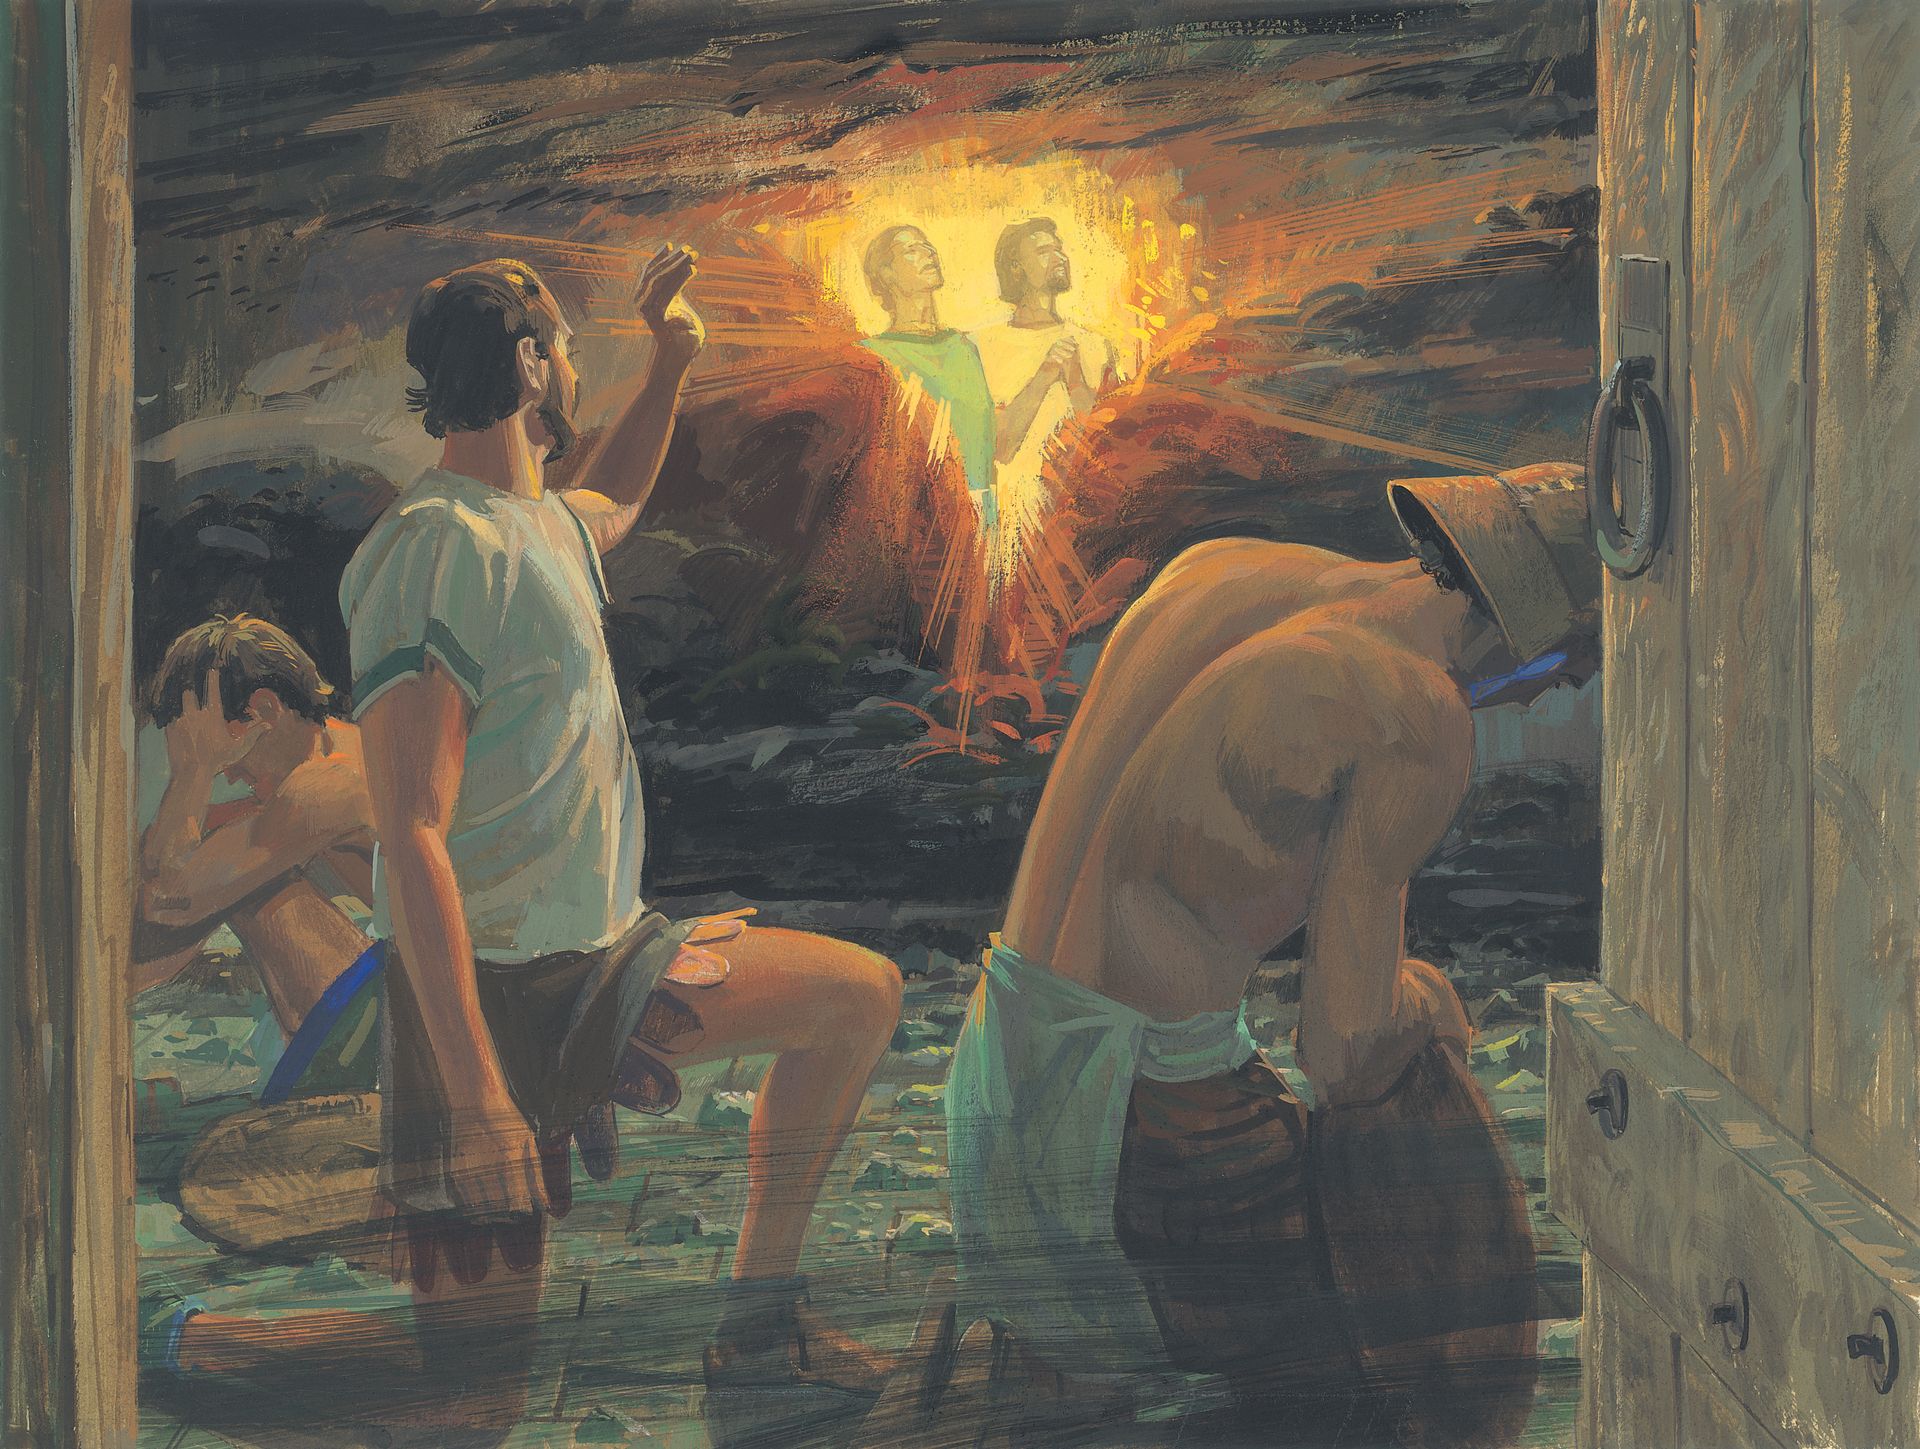 A painting by Jerry Thompson depicting Nephi and Lehi in prison.